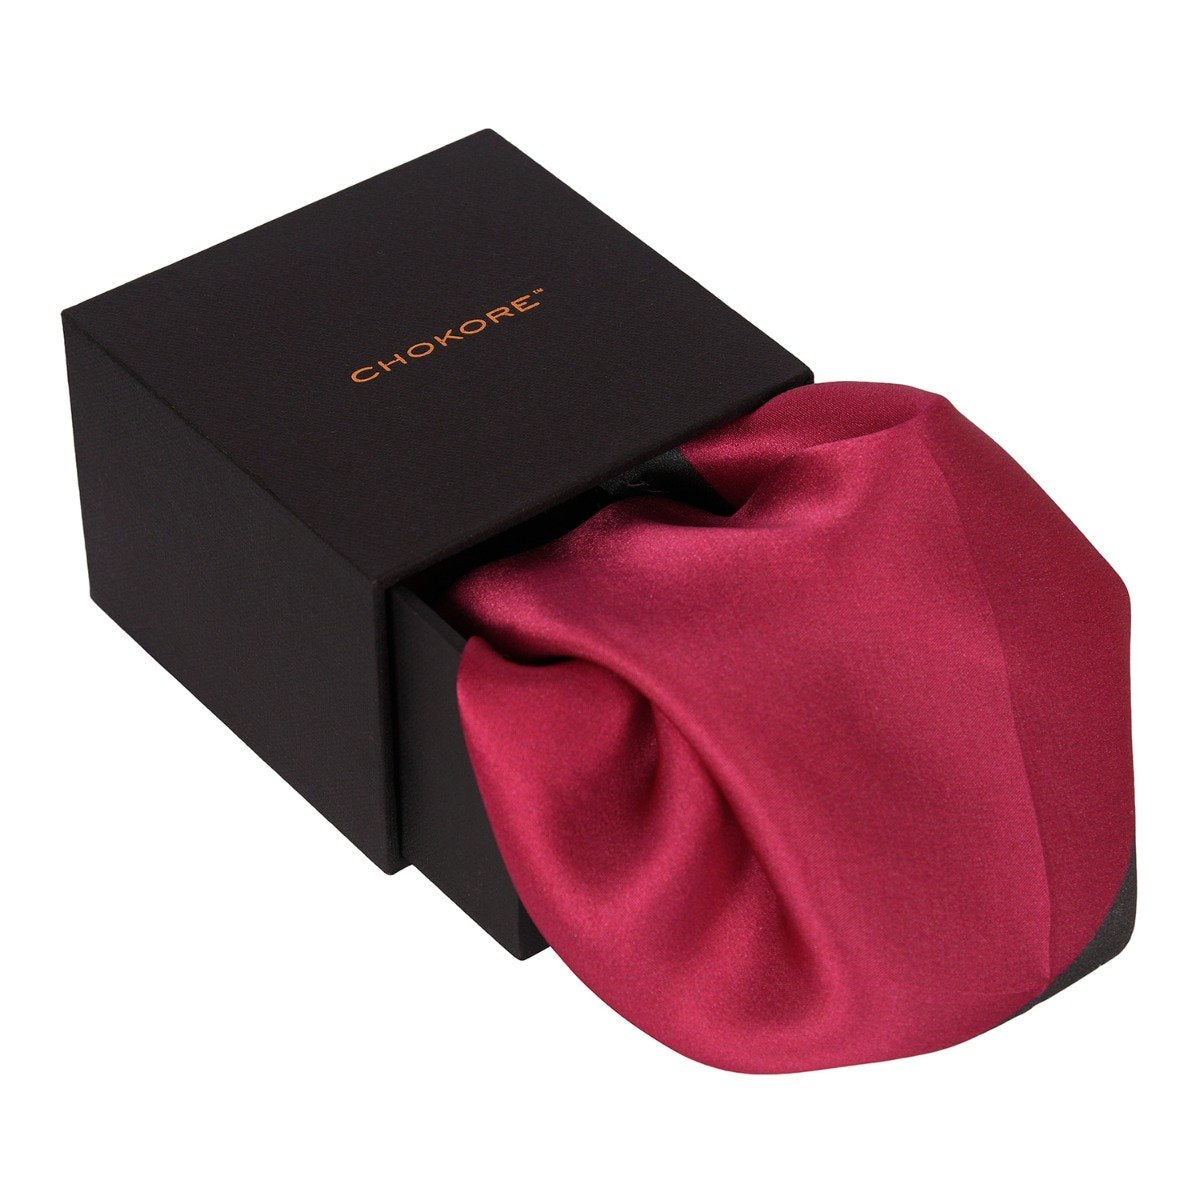 Chokore 2-in-1 Dark Grey & Wine Pink Silk Pocket Square from the Solids Line